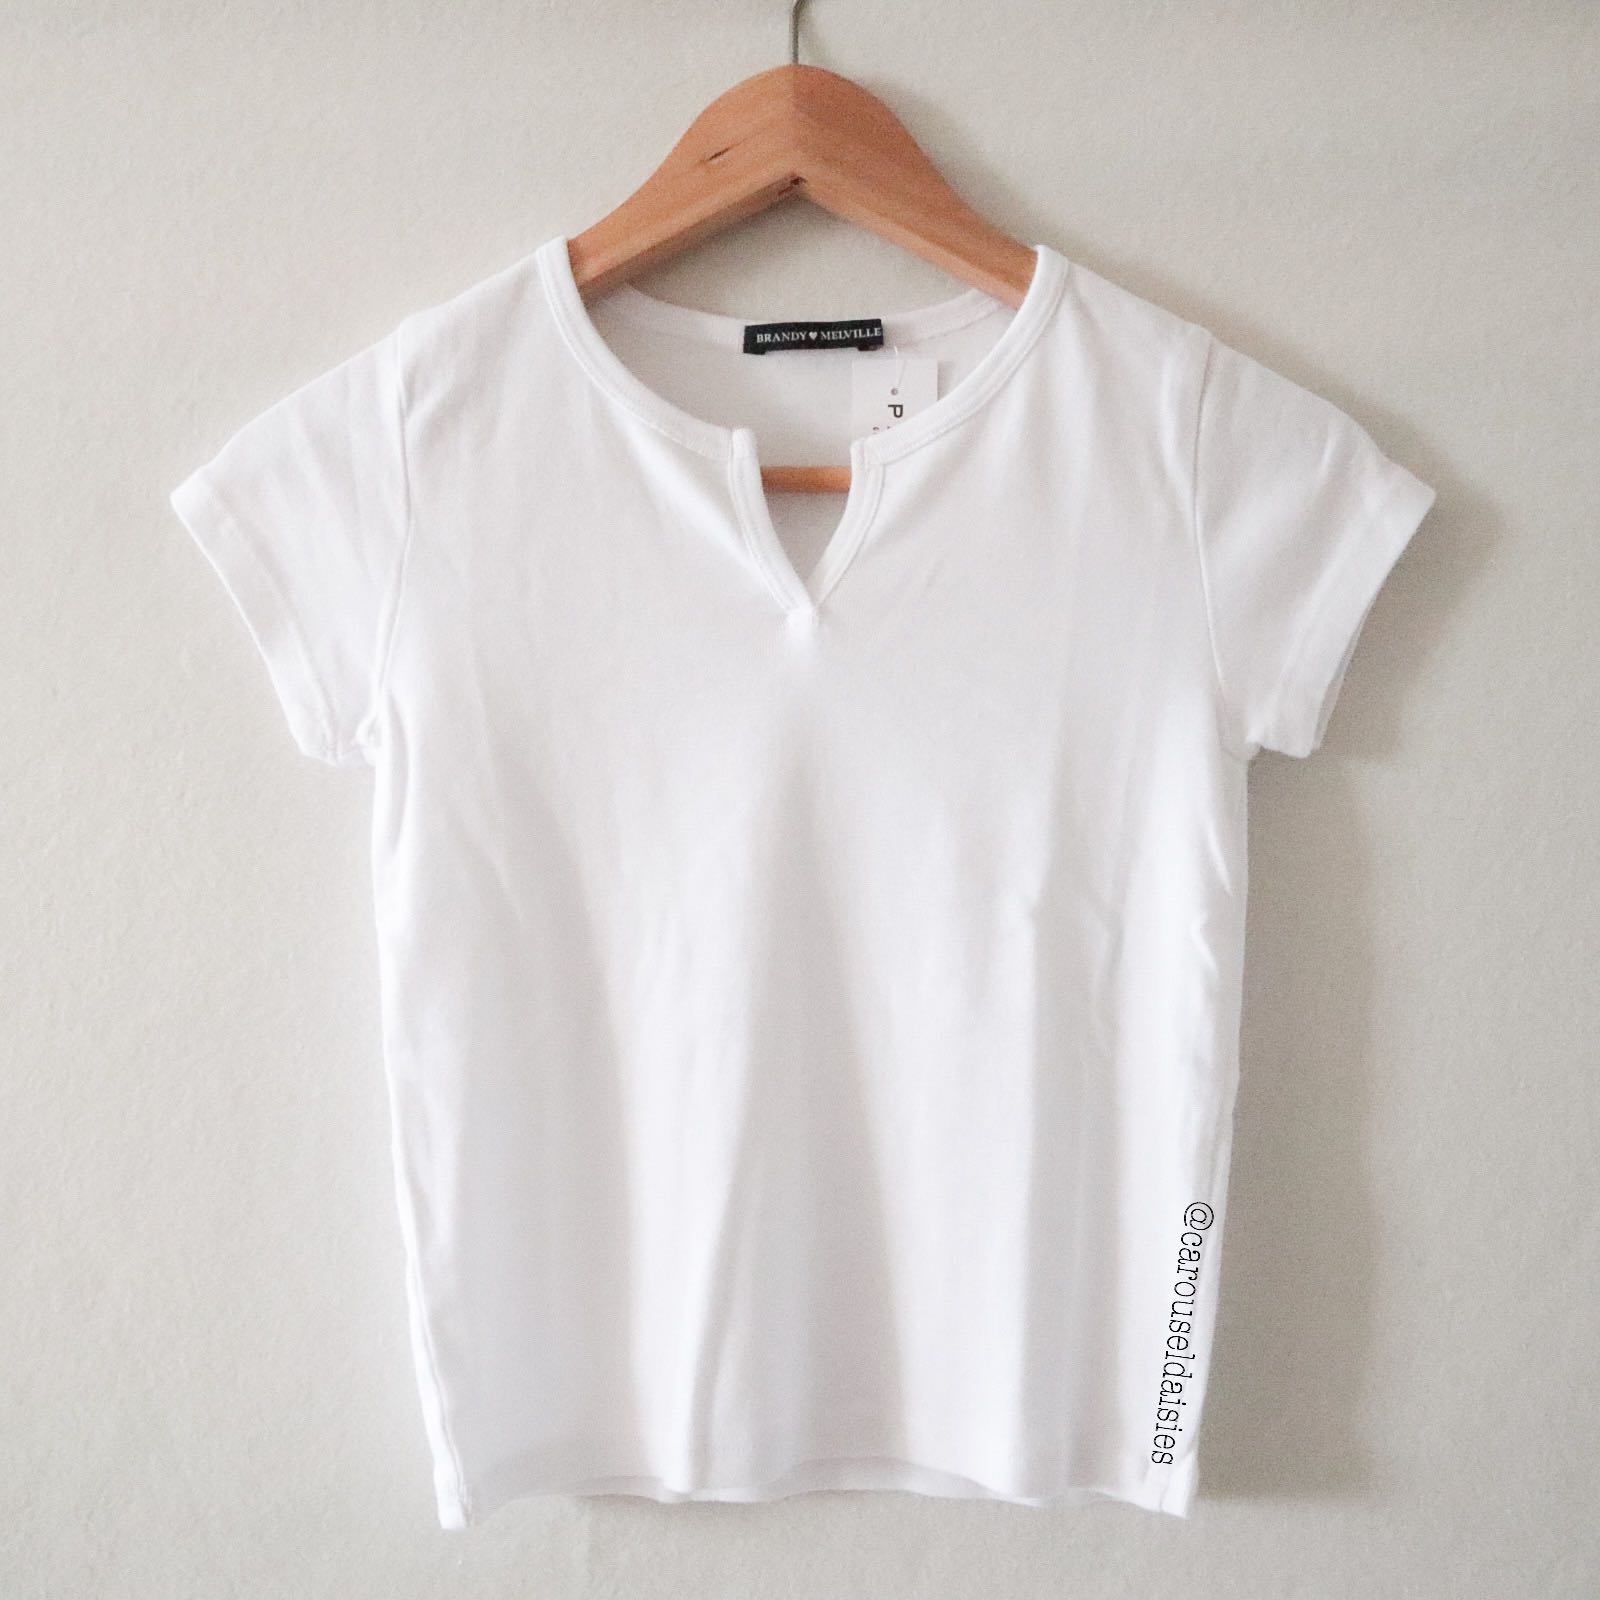 Brandy Melville Ashlyn V Notch Top White Women S Fashion Tops Other Tops On Carousell